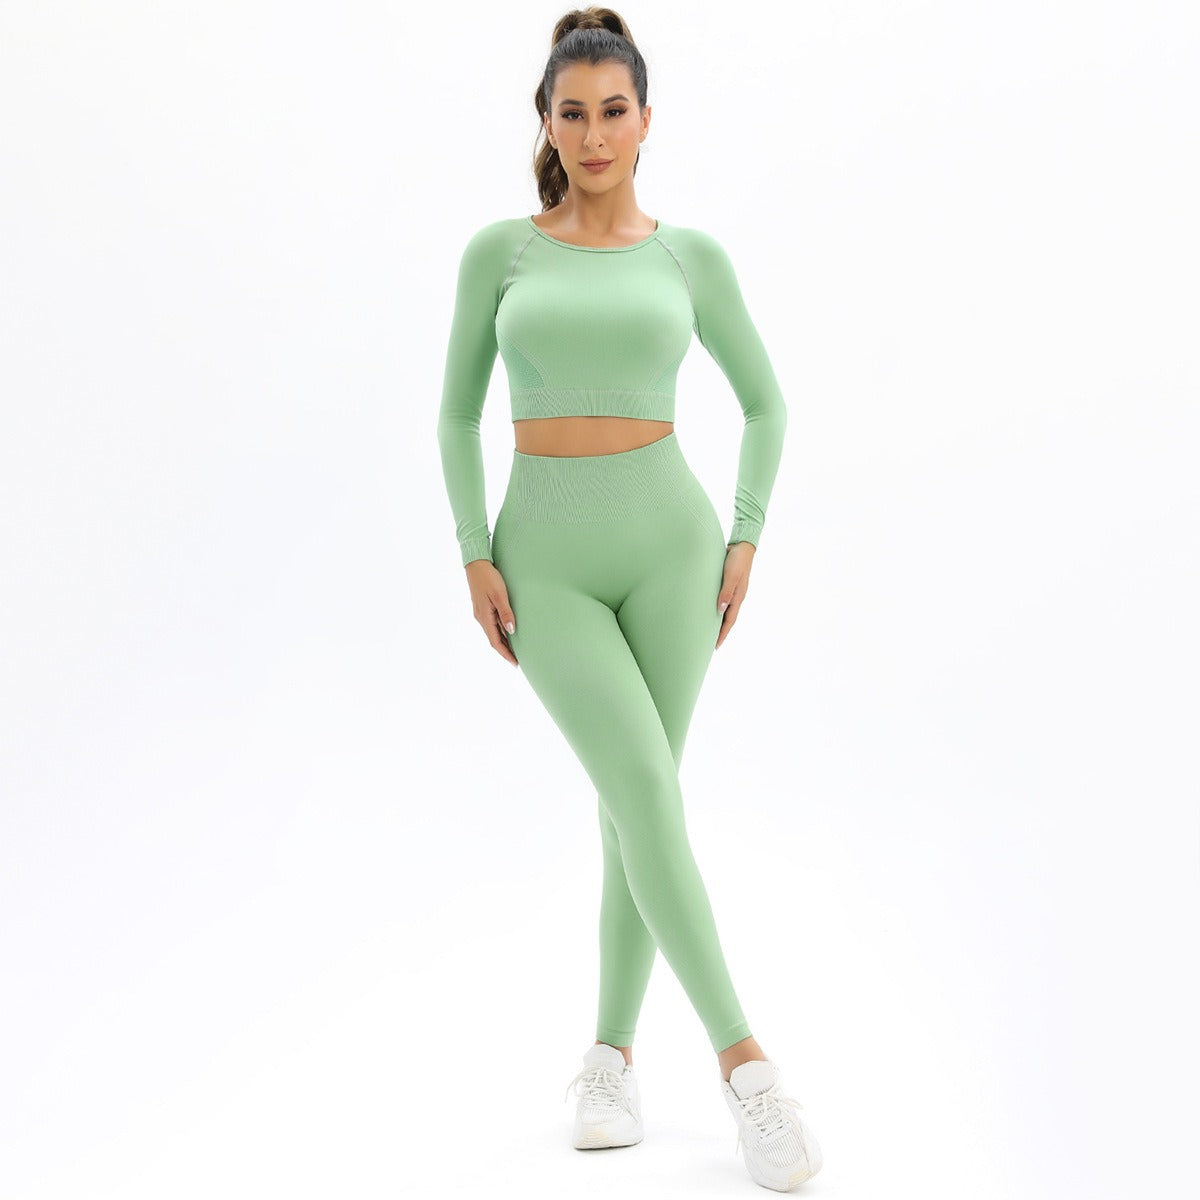 Peach Seamless Knitting Backless High Elastic Long Sleeve Yoga Suit Sports Running Fitness Two-Piece Set For Women